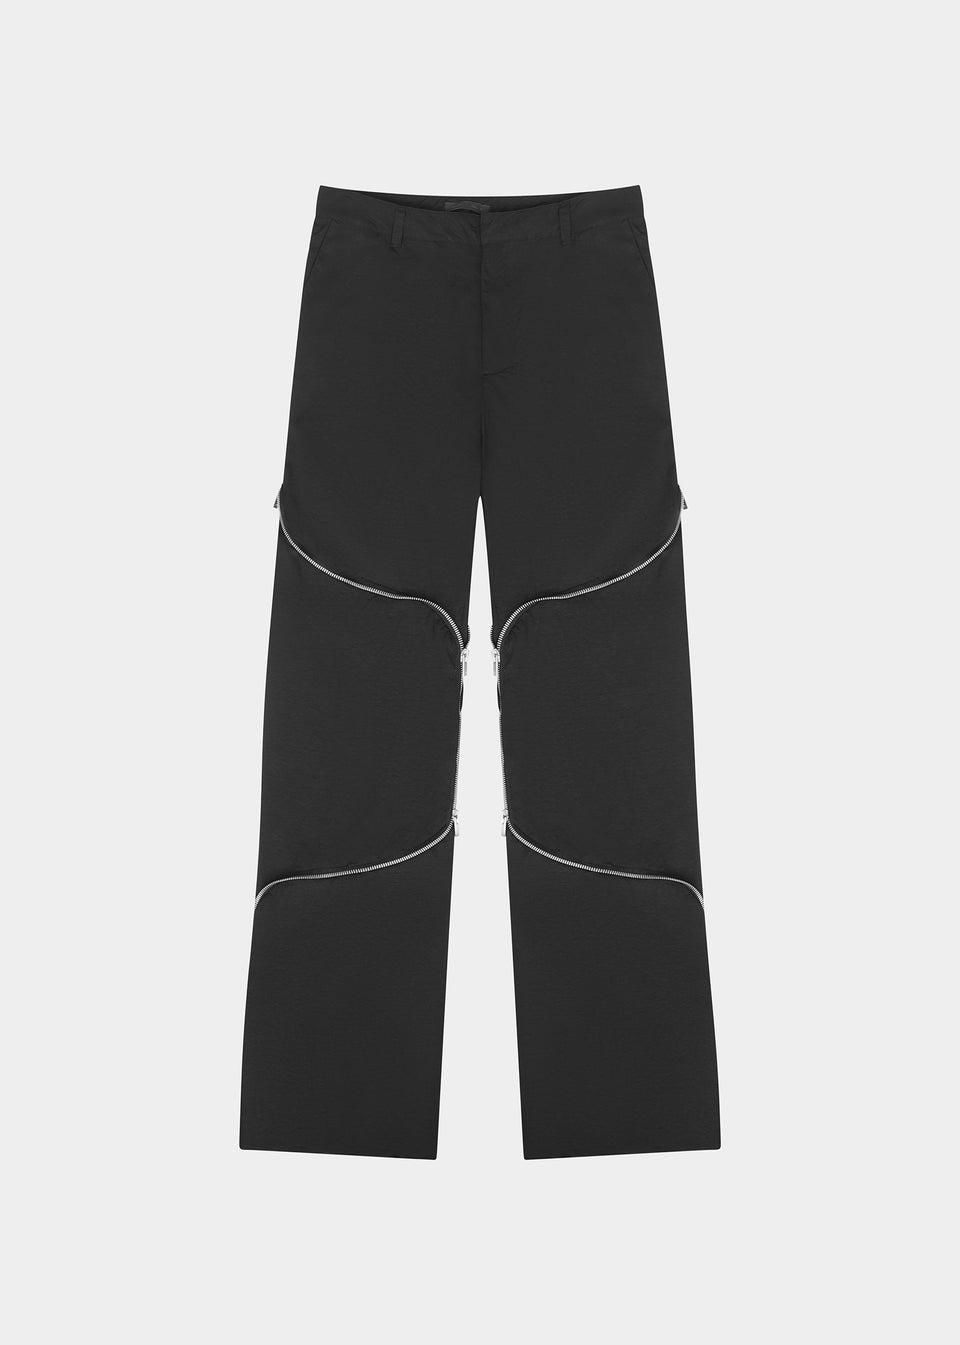 PHYLLOTAXIS TROUSERS by HELIOT EMIL